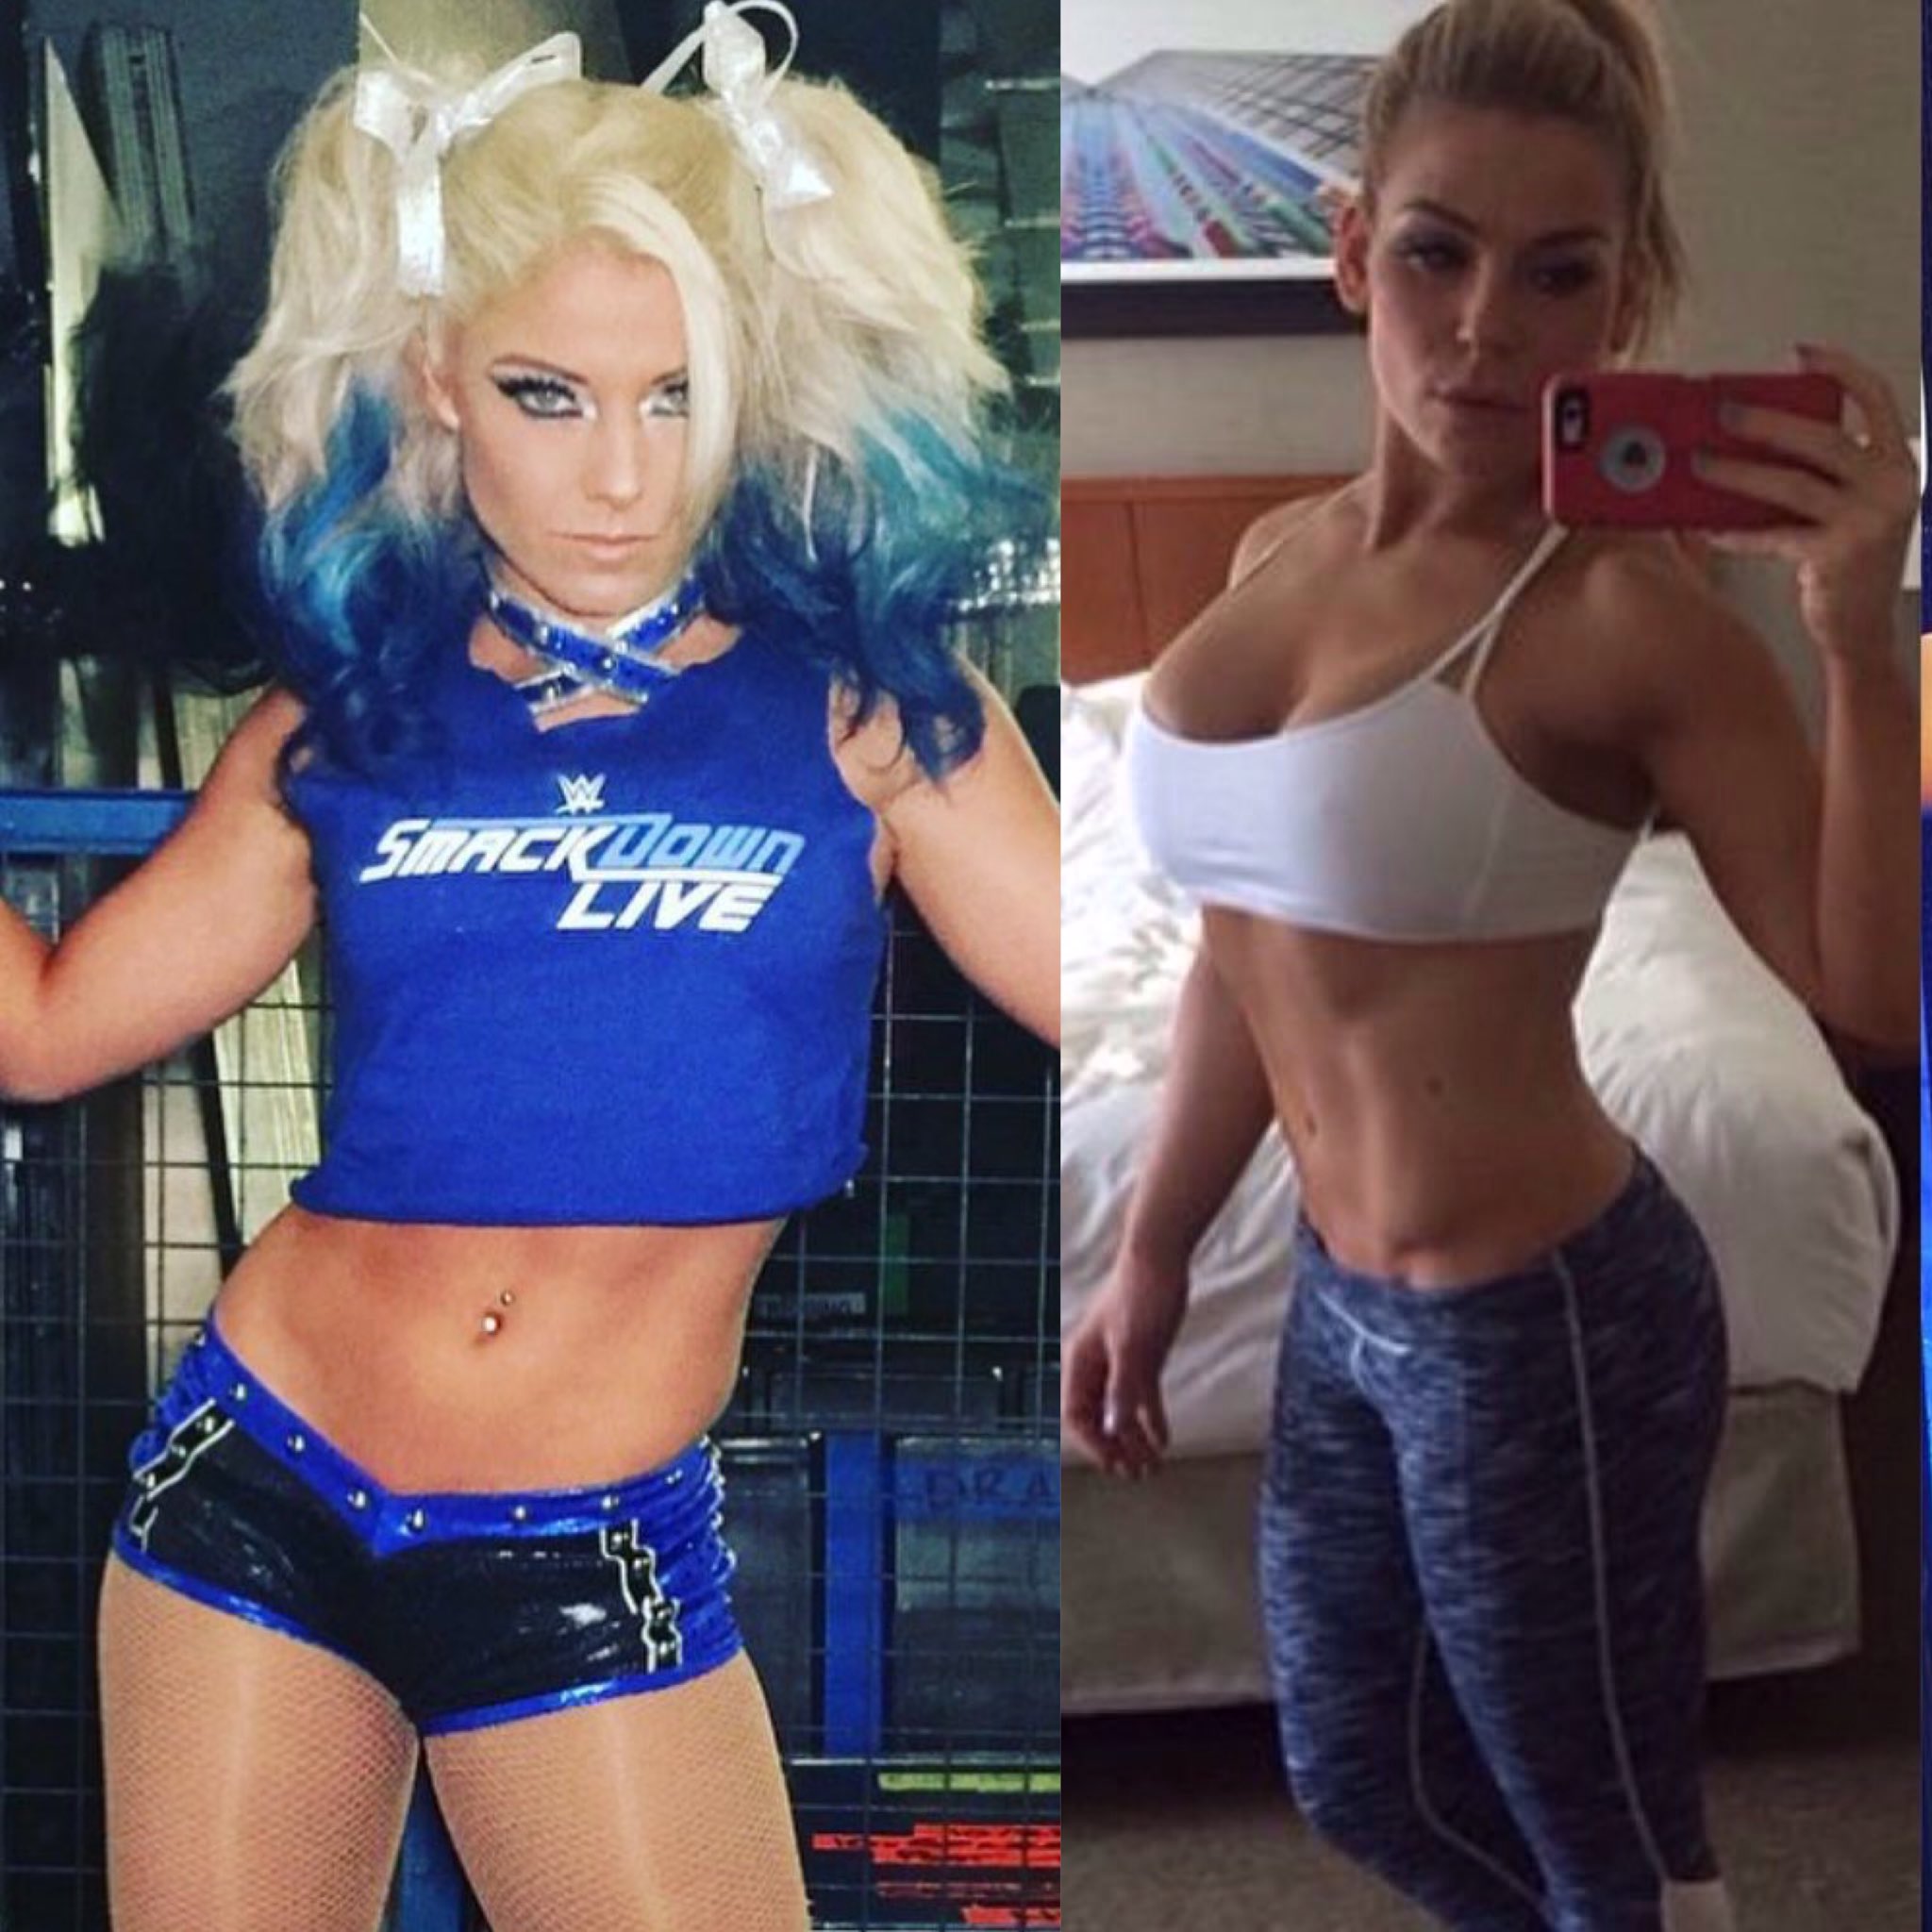 Who would you rather leaked next?RT for Alexa Bliss Like for Natalya. 